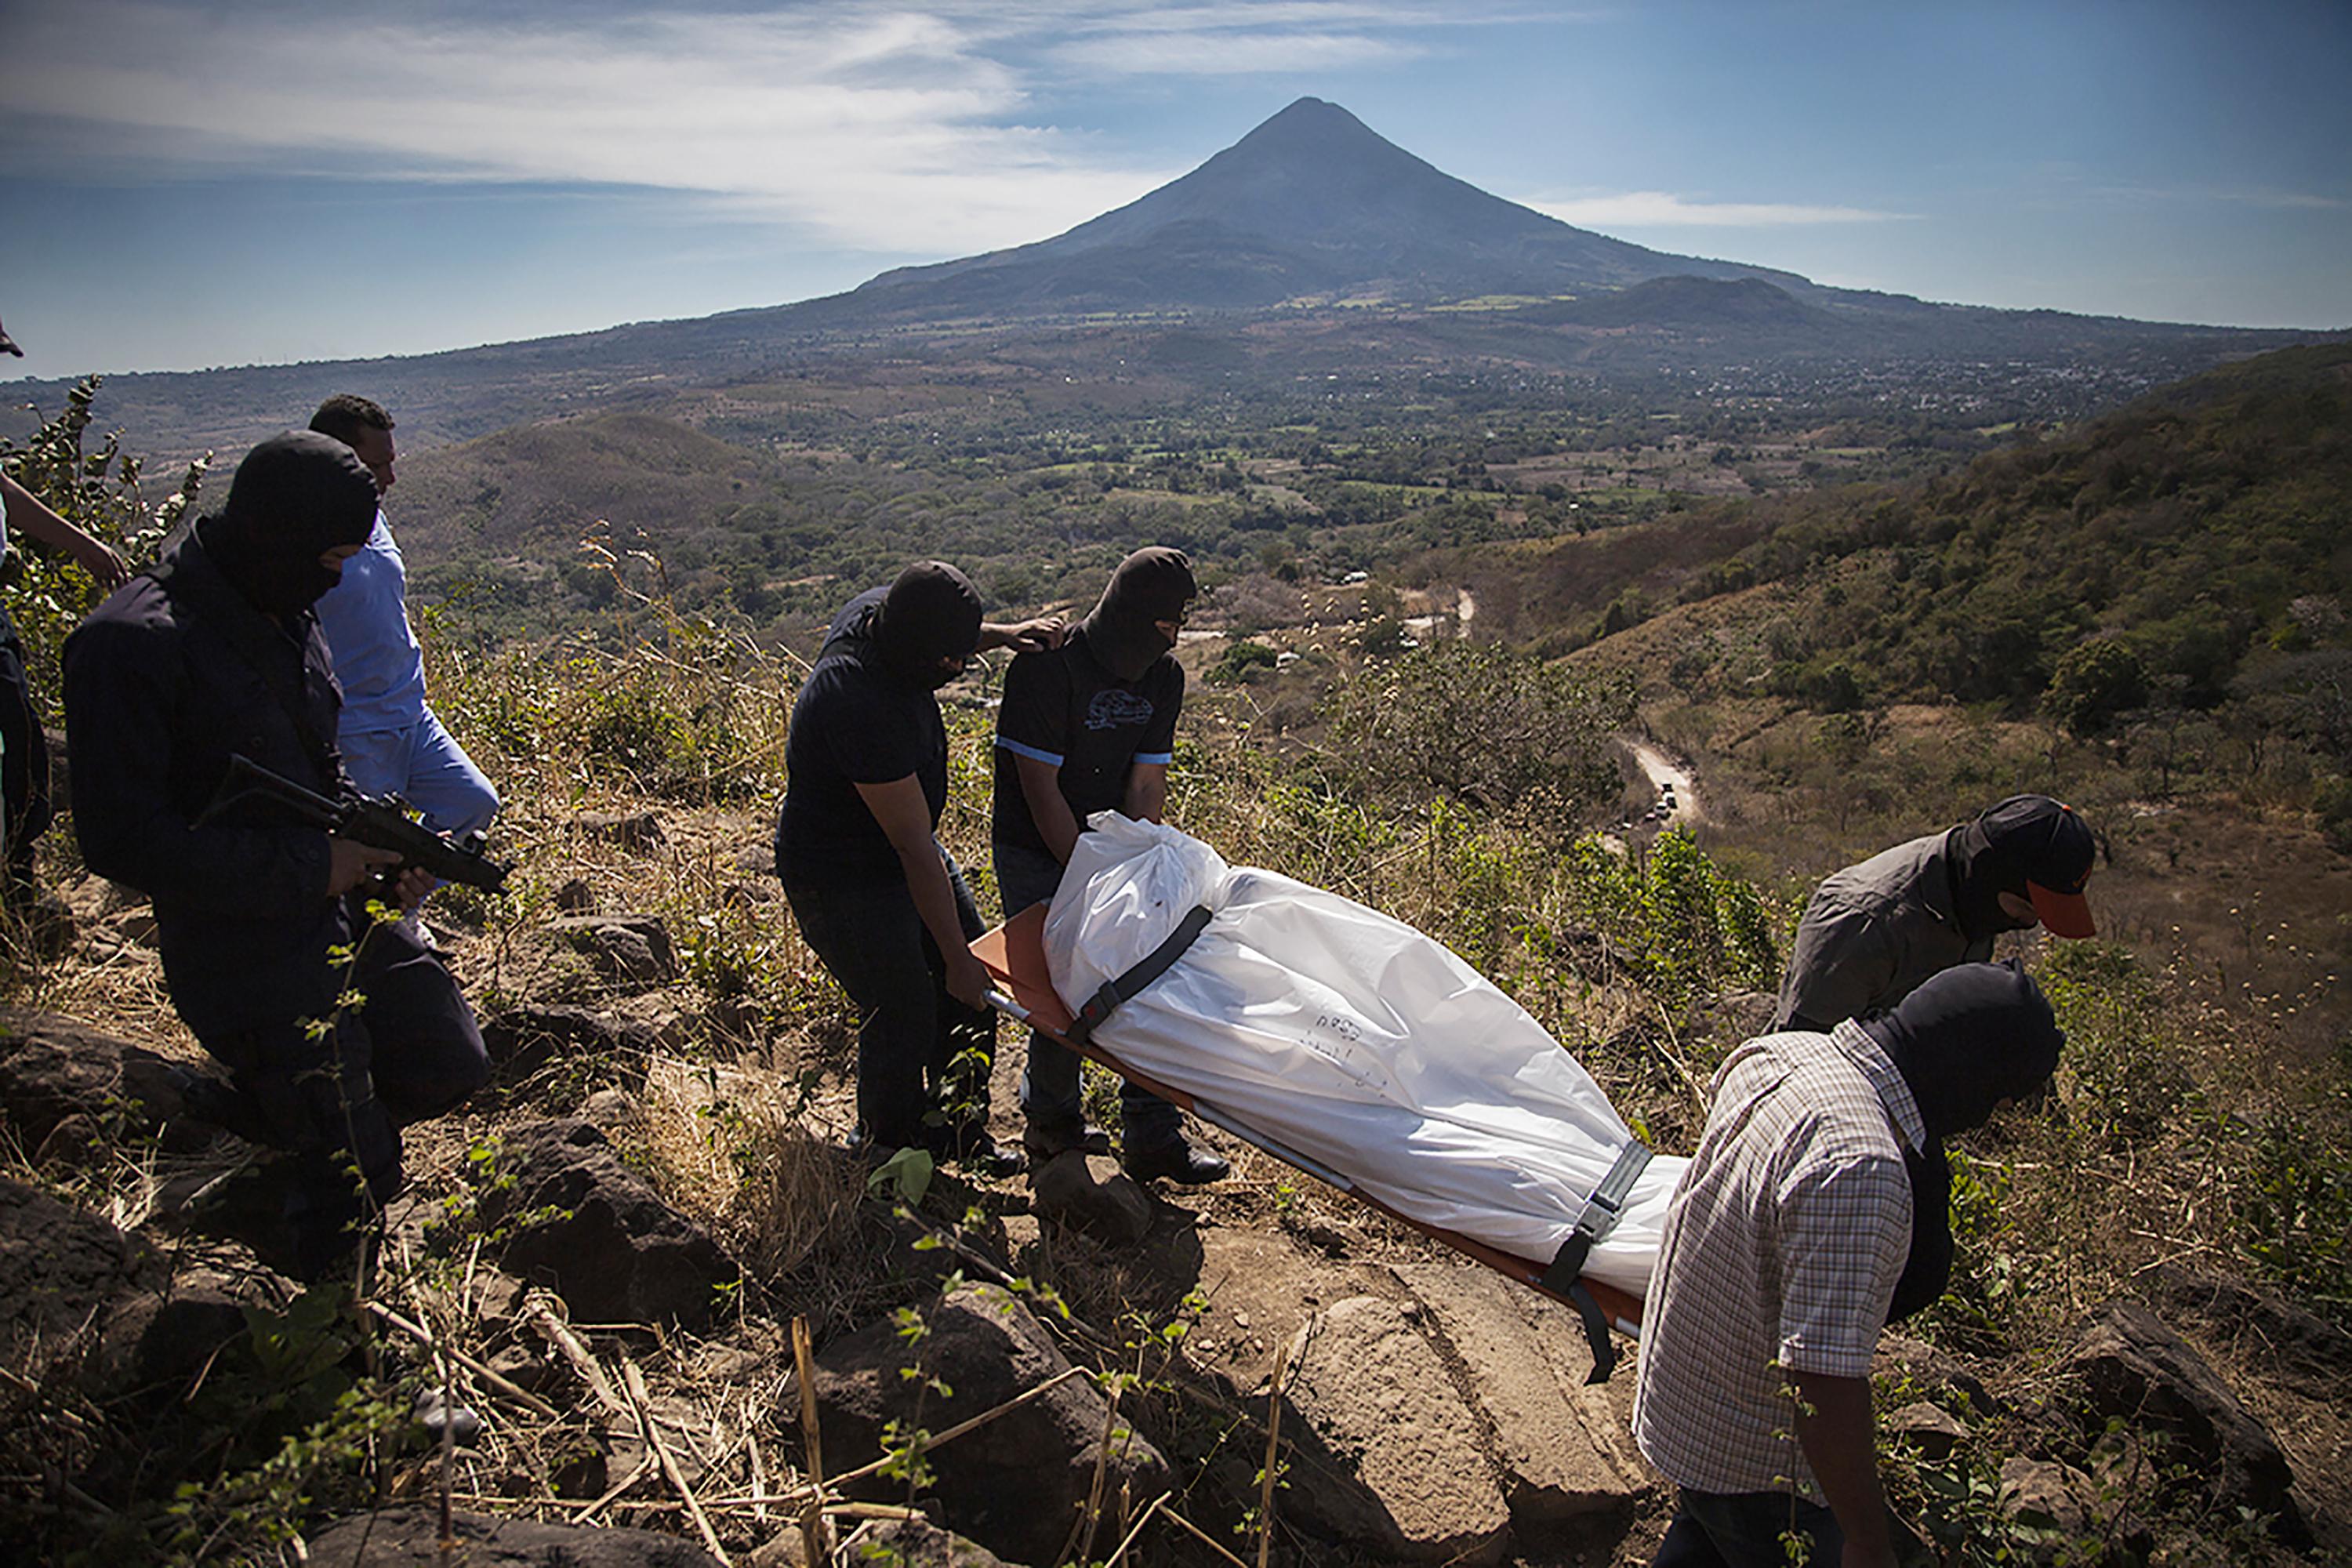 Police officers remove the body of a National Civil Police agent who died in a shootout with gang members on February 9, 2016 on the Cutumayo hill in San Vicente. Behind them is the Chichontepec Volcano. Photo: Víctor Peña/El Faro